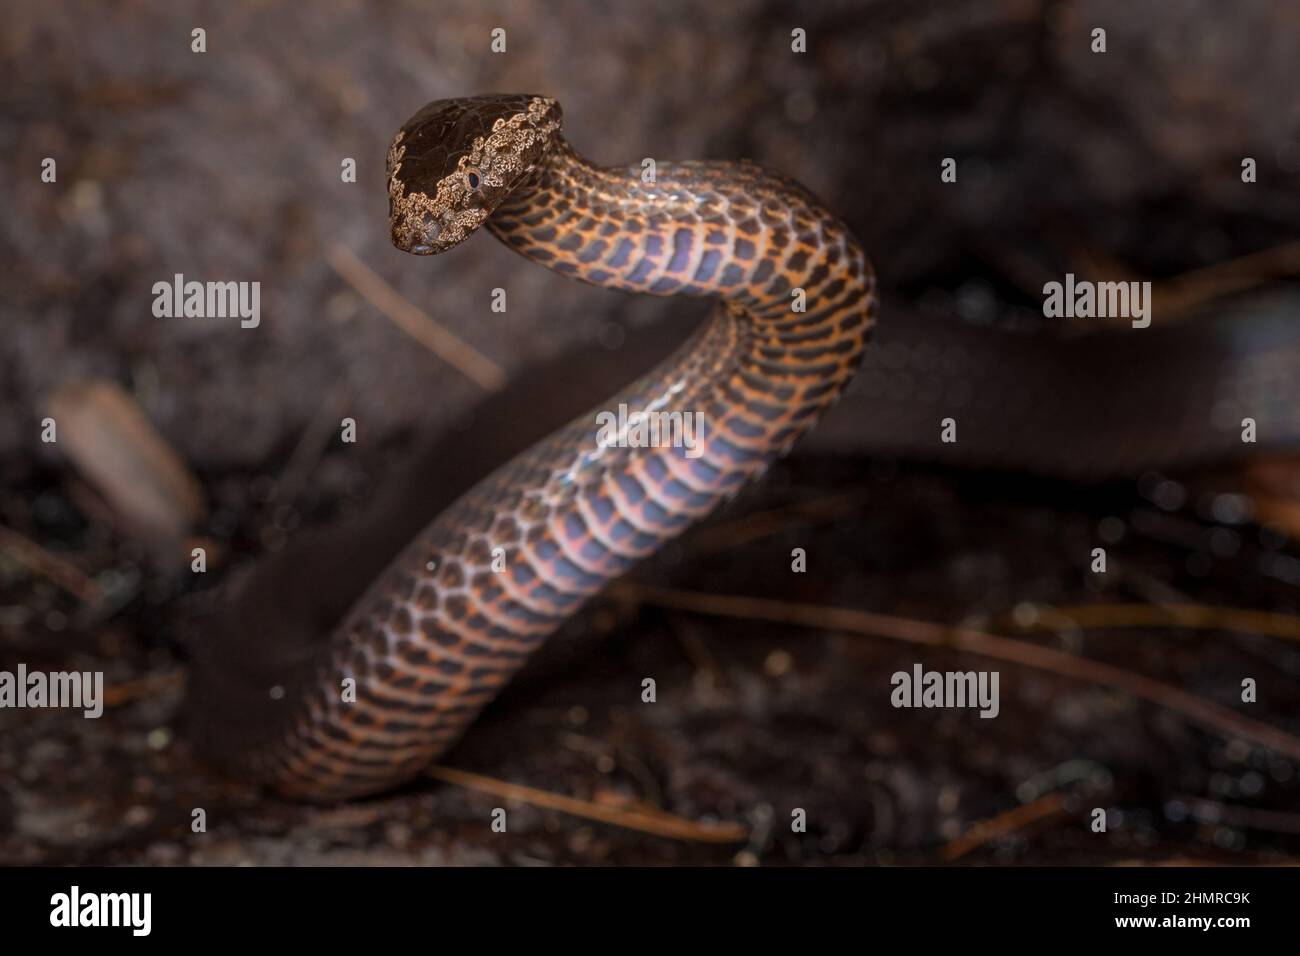 Golden-crowned snake (Cacophis squamulosus) in defence posture. Byron Bay region, NSW, Australia. Stock Photo